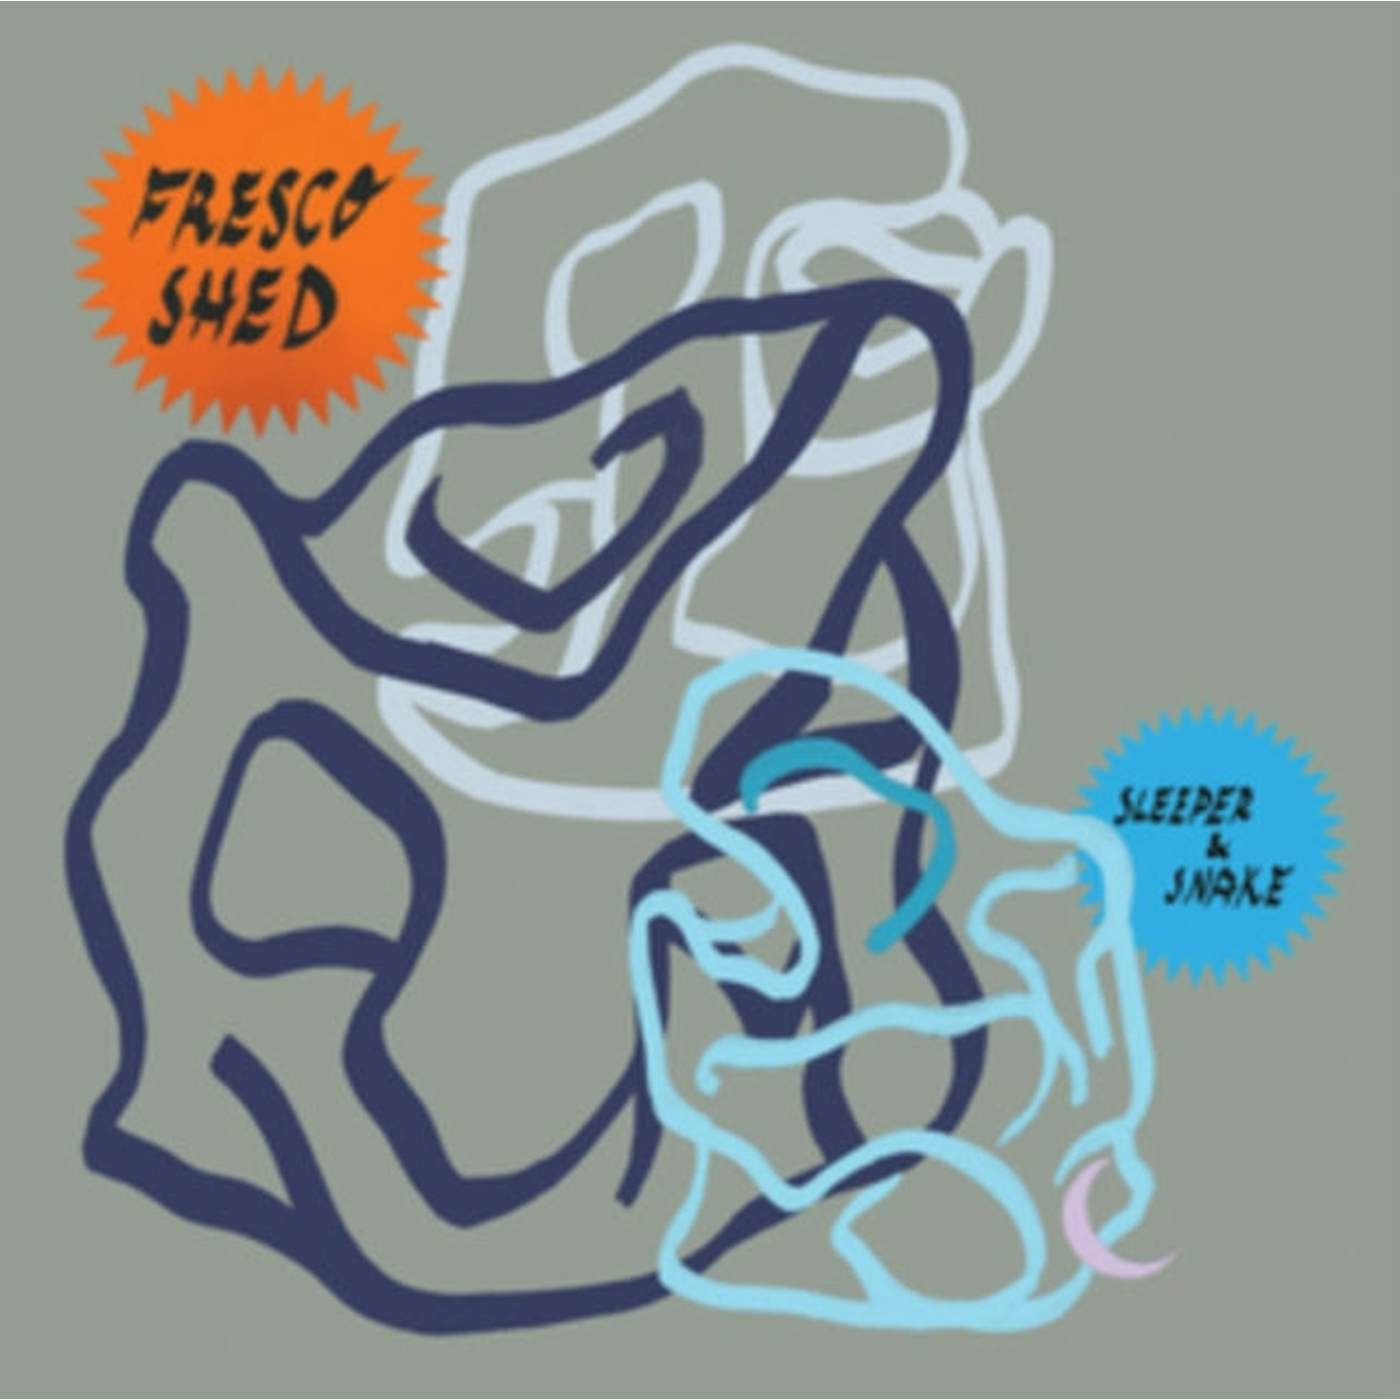 Sleeper And Snake LP Vinyl Record - Fresco Shed